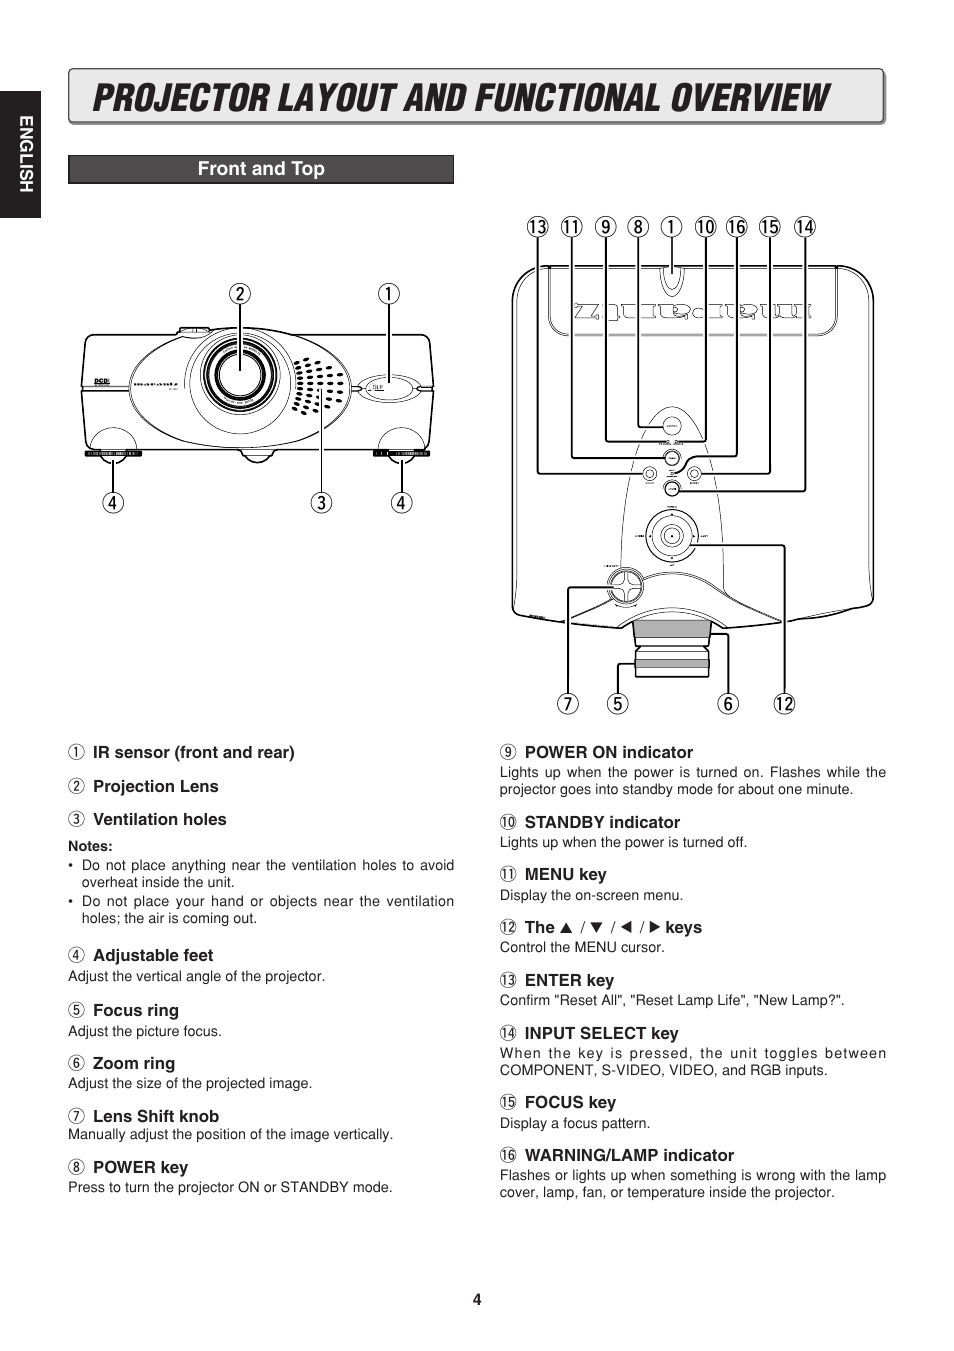 Projector layout and functional overview, Front and top | Marantz VP-12S1N User Manual | Page 6 / 31